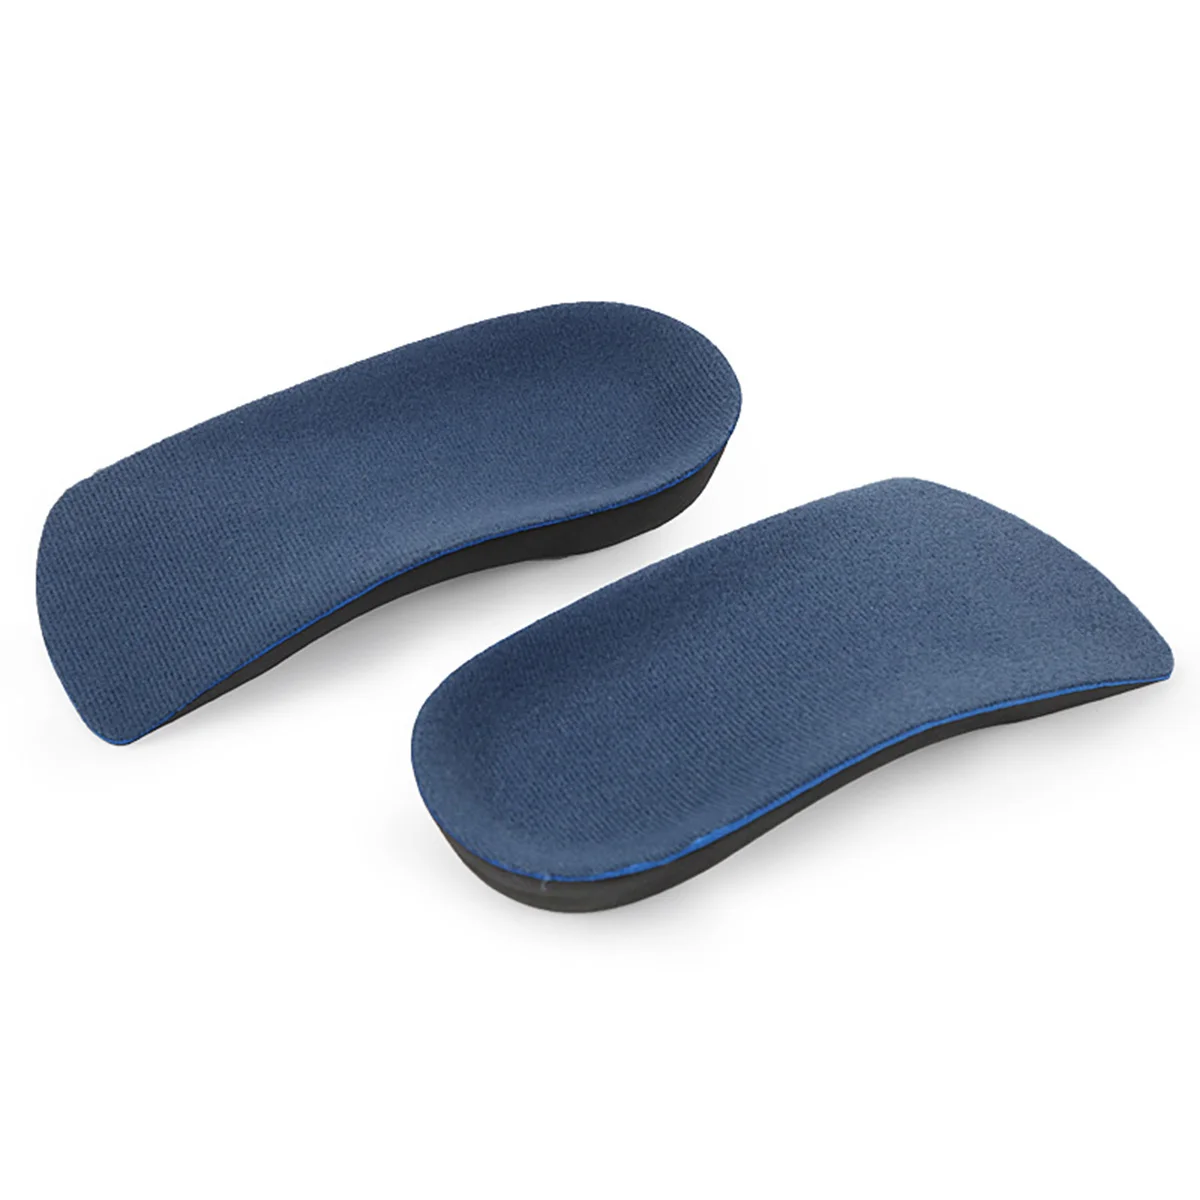 

Arch Support Insoles Orthotic Shoe Insoles for Plantar Fasciitis Flat Feet EVA Relieve Pain Inserts Flatfoot Corrector- Pads